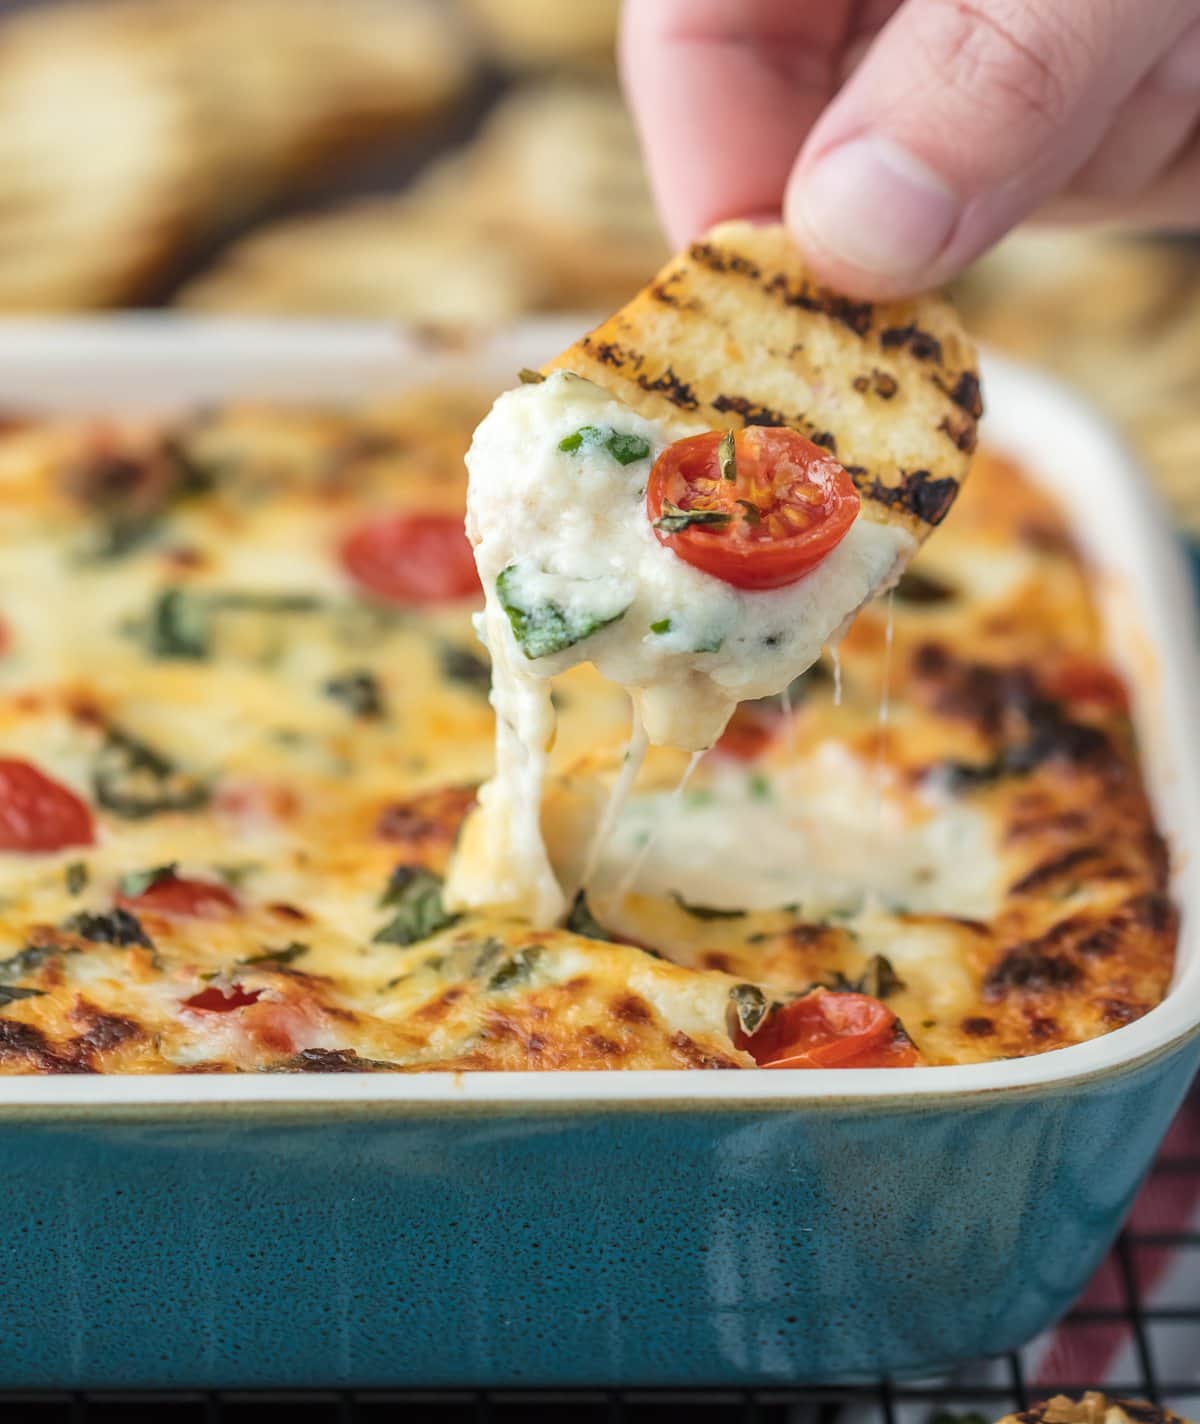 Dipping toasted bread into cheesy caprese dip